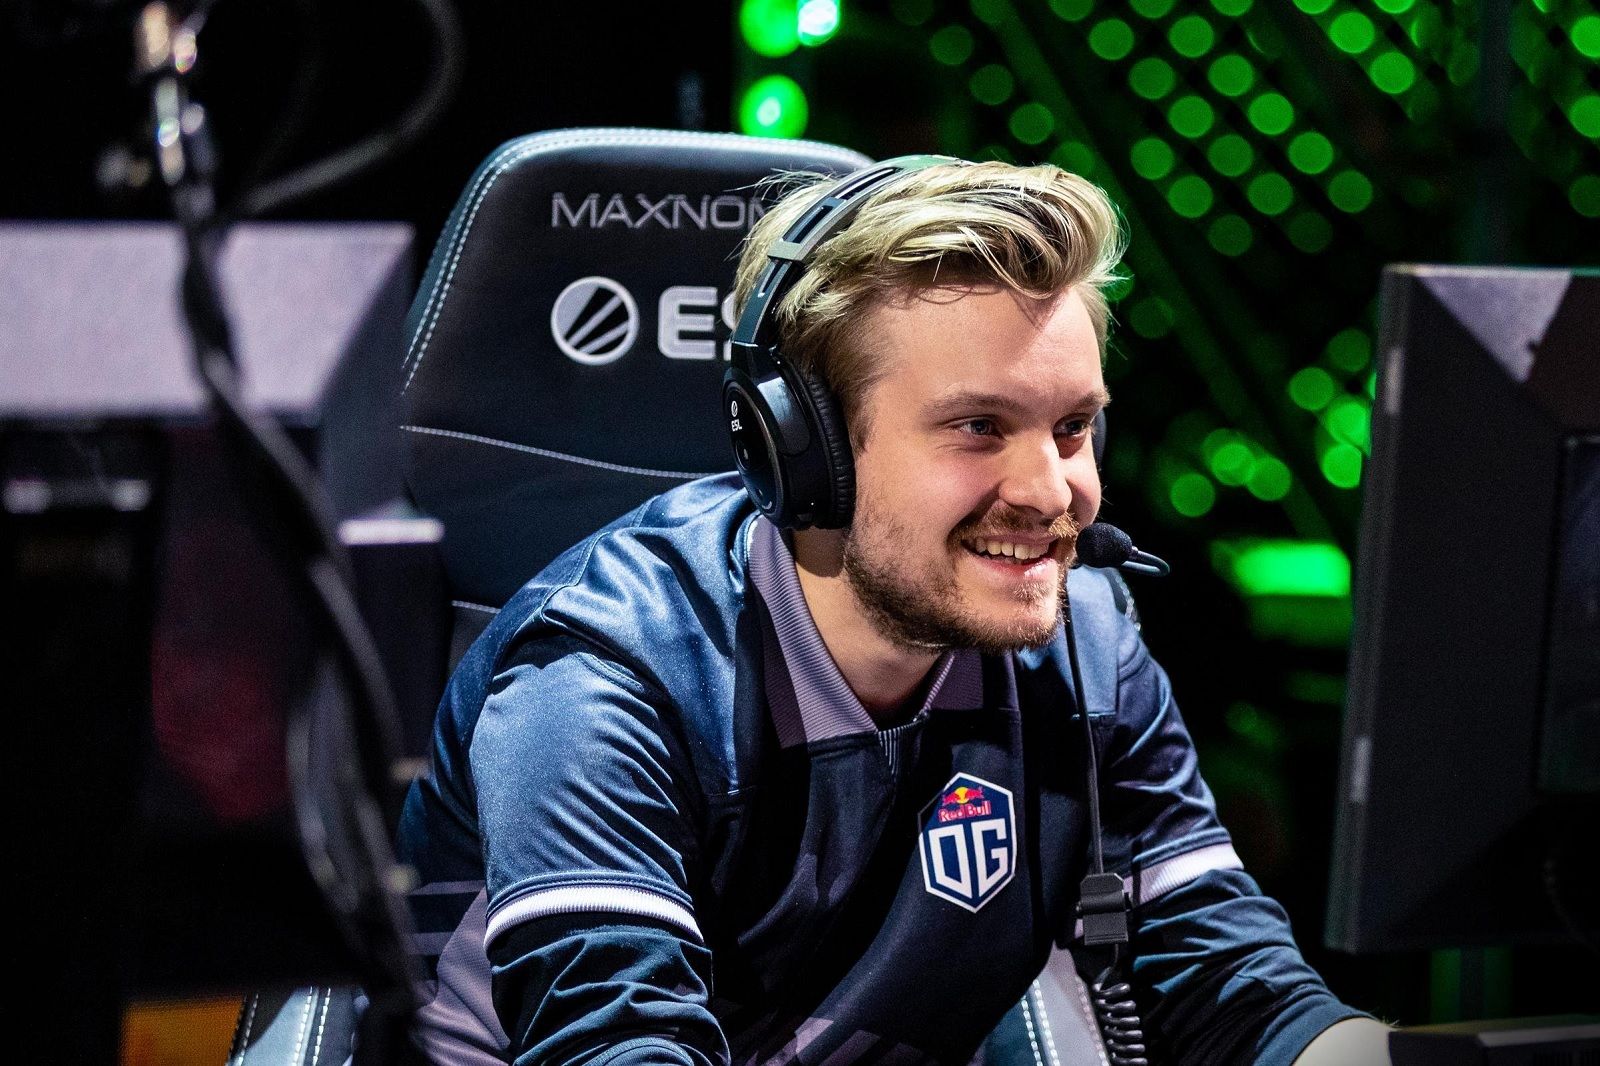 Top 10 highest earning eSports players in the world image 1